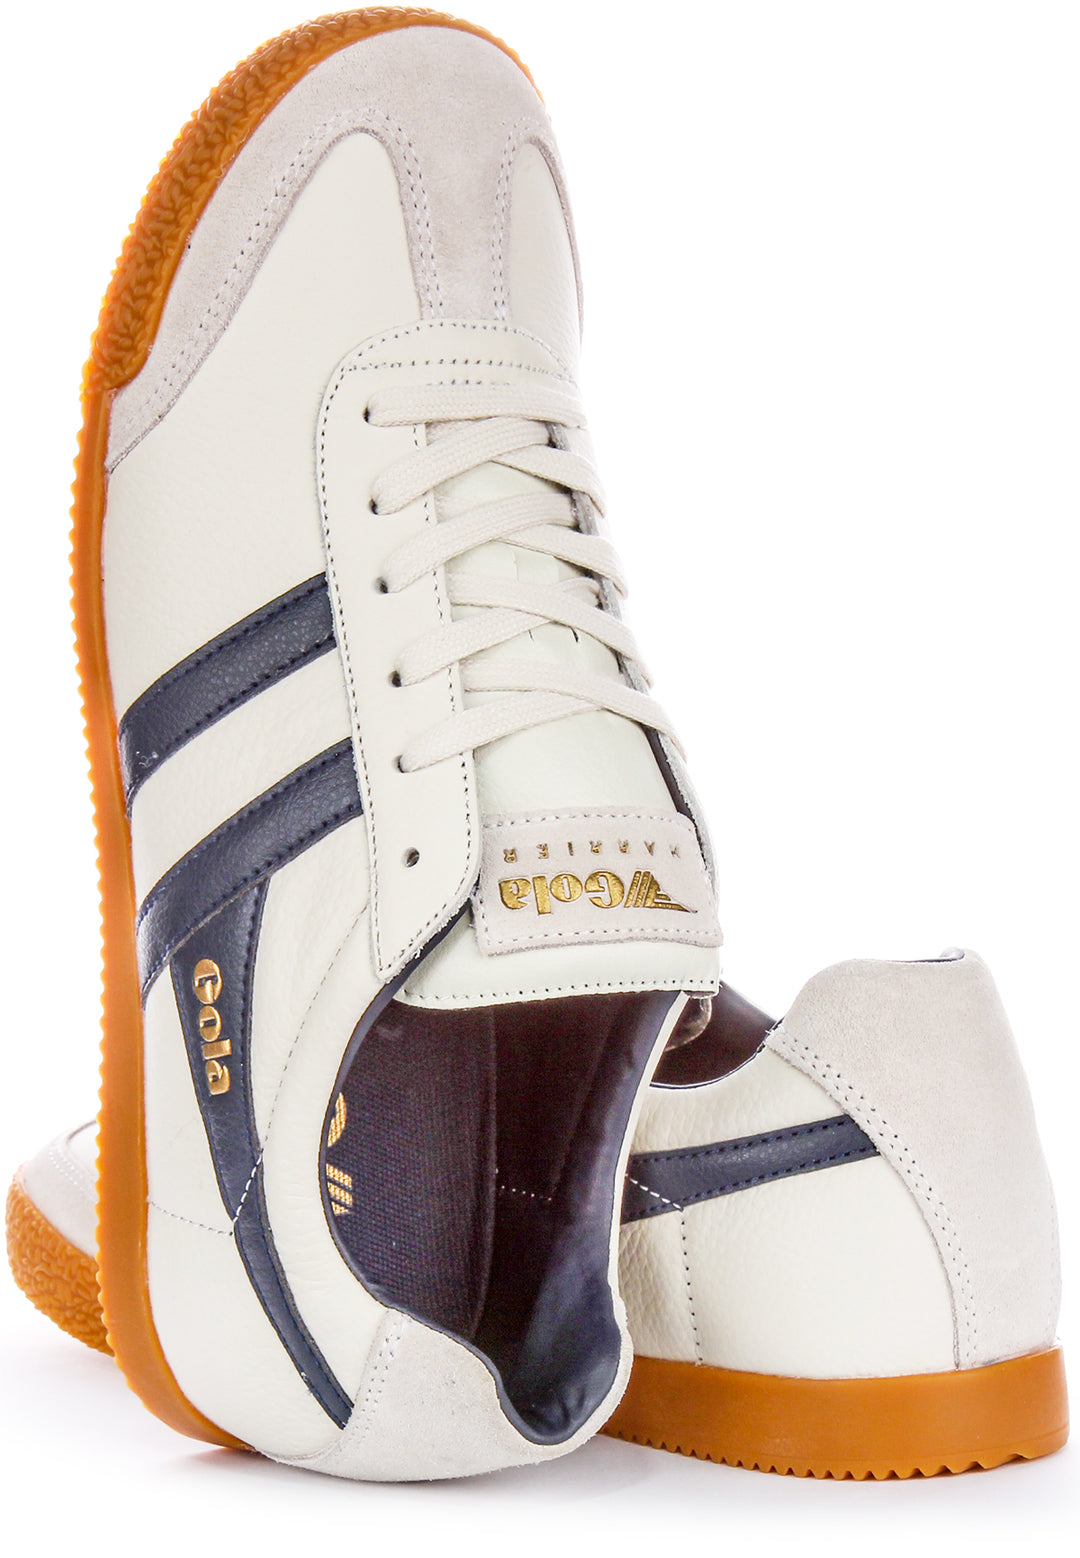 Gola Classics Harrier Leather In Offwhite Blu For Men